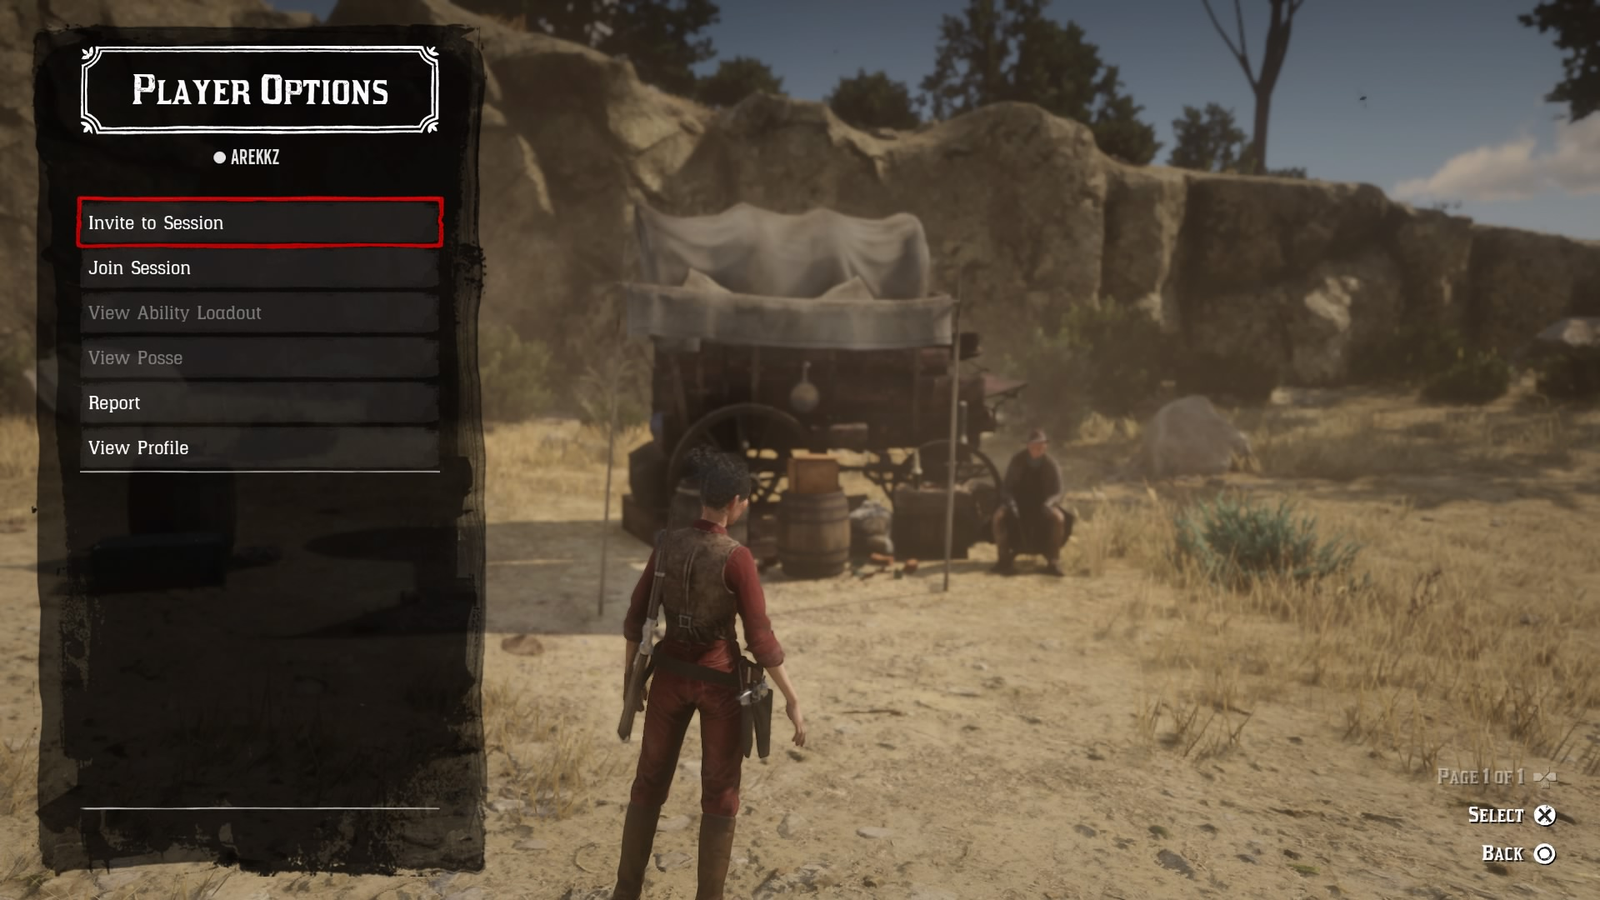 How To Get Red Dead Redemption 2 For FREE 